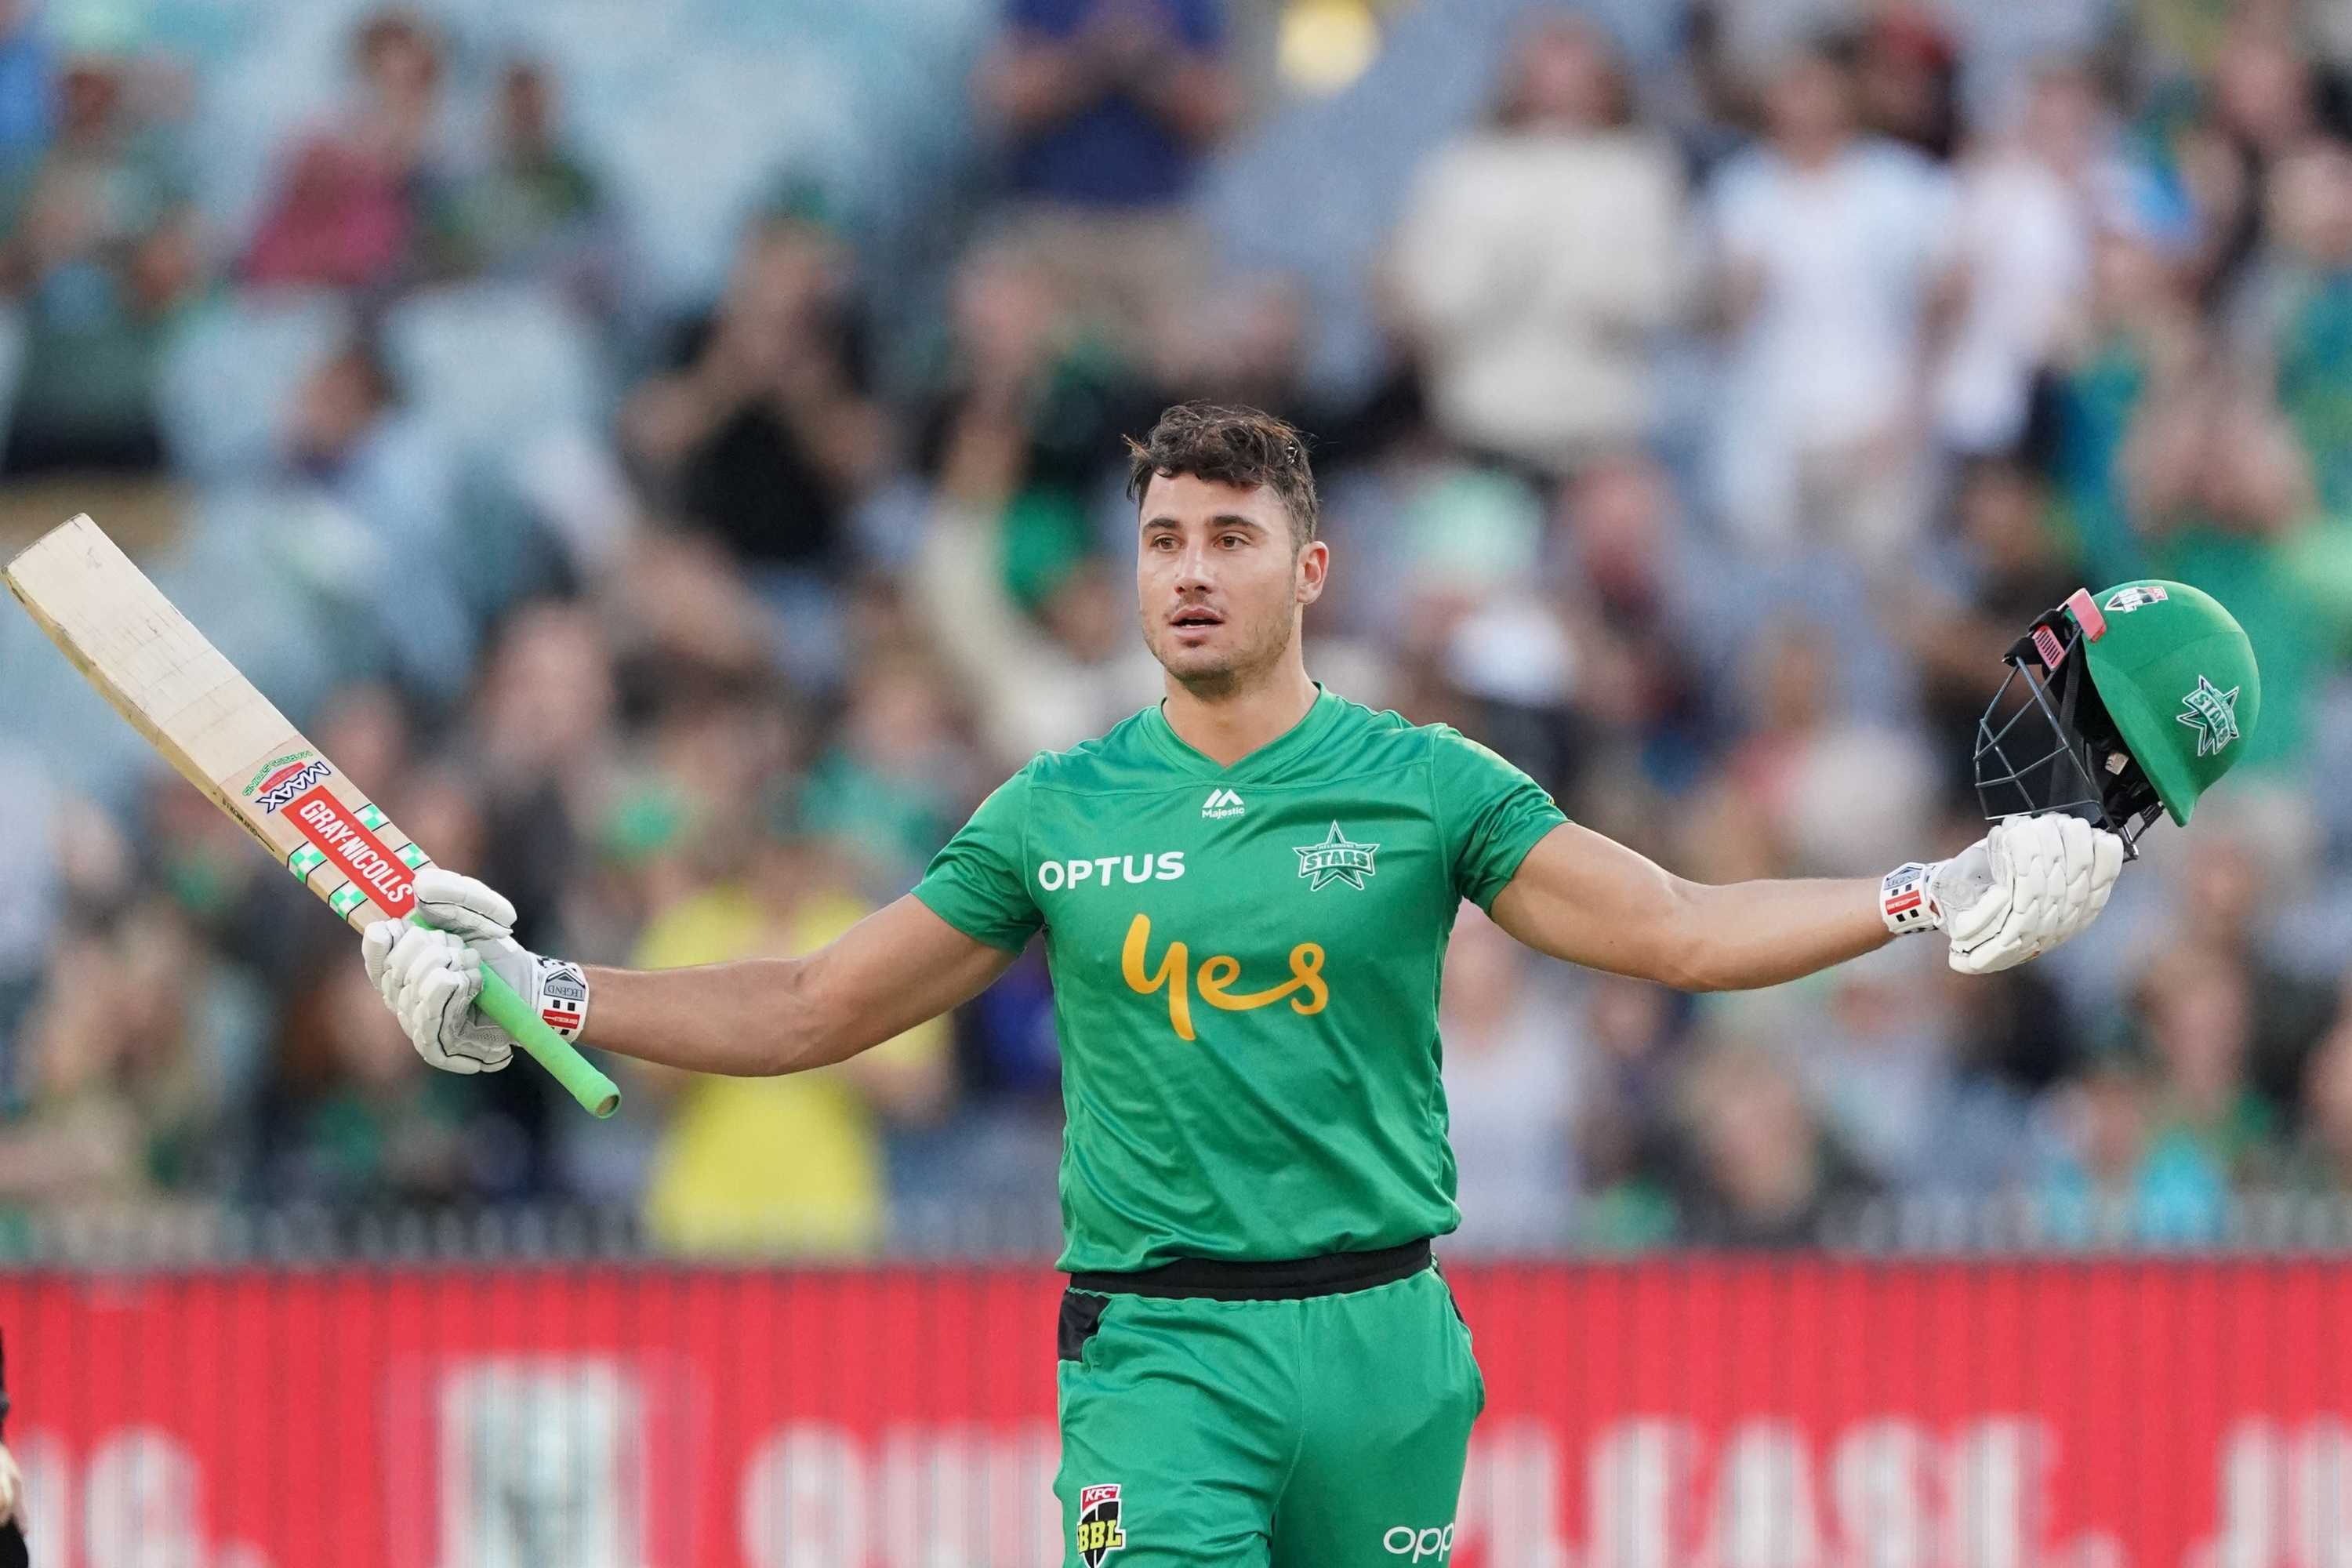 Marcus Stoinis hits record Big Bash League score, using burden of reaction to his homophobic slur